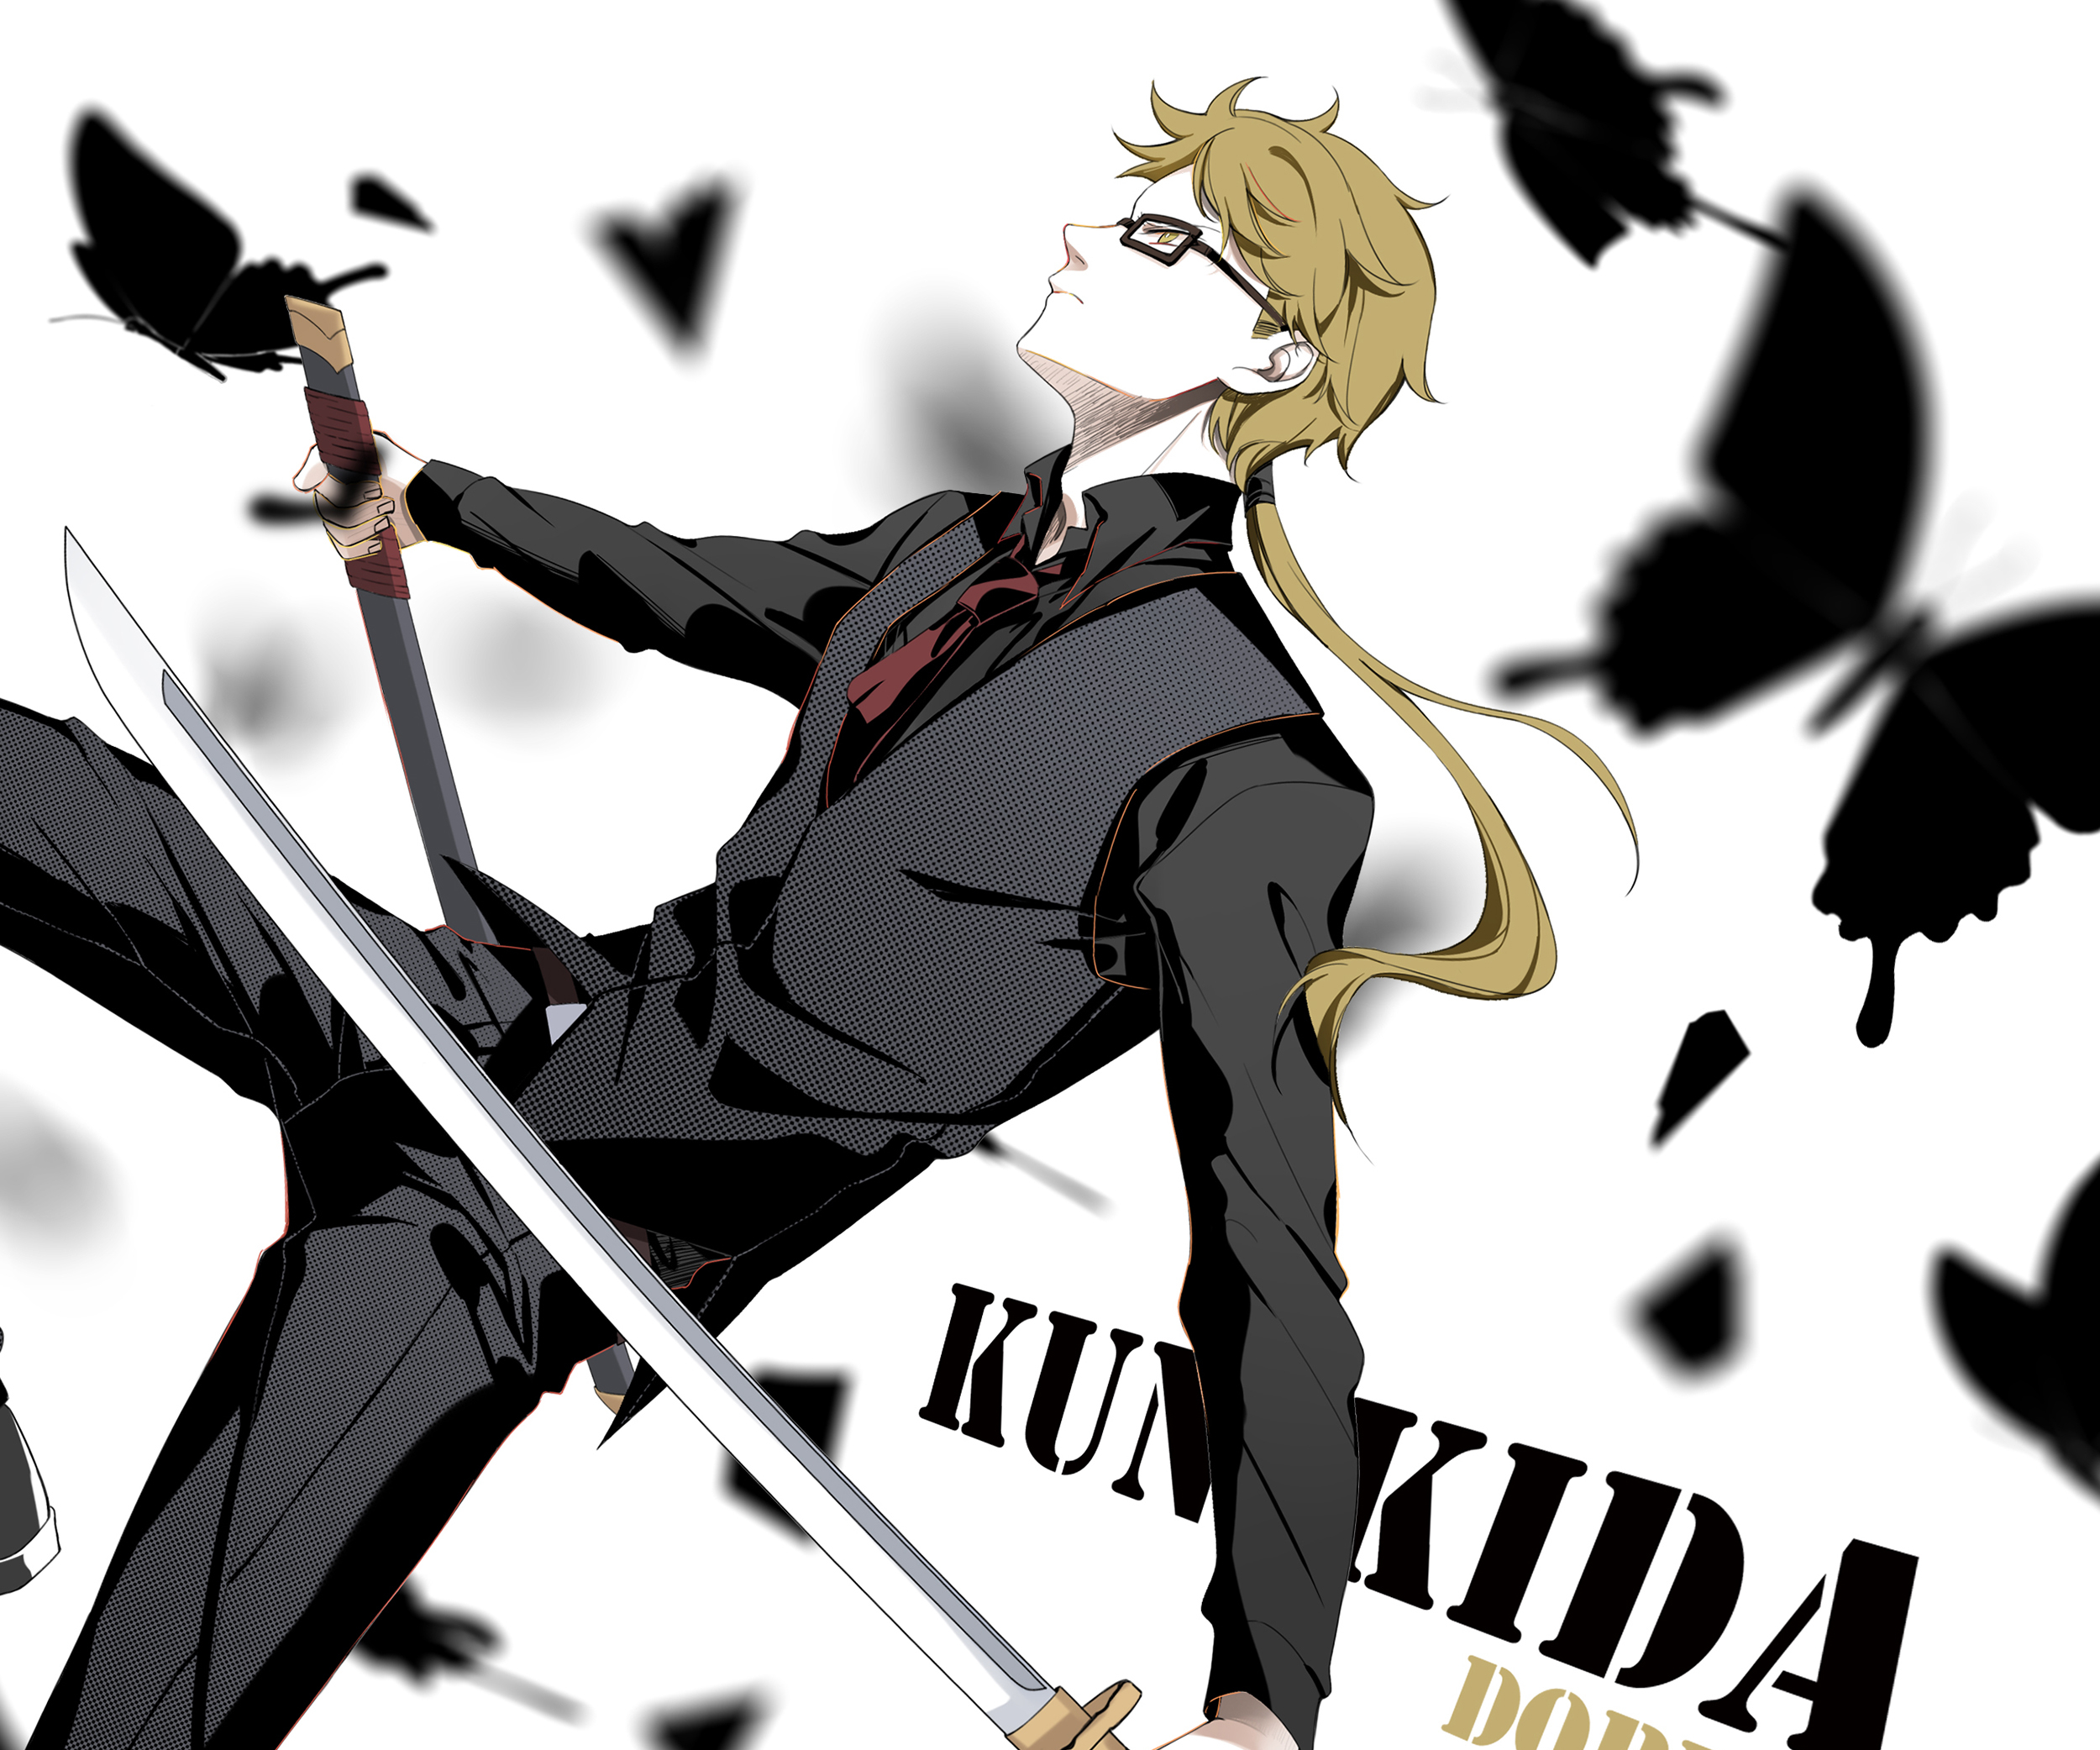 Anime Bungou Stray Dogs HD Wallpaper | Background Image